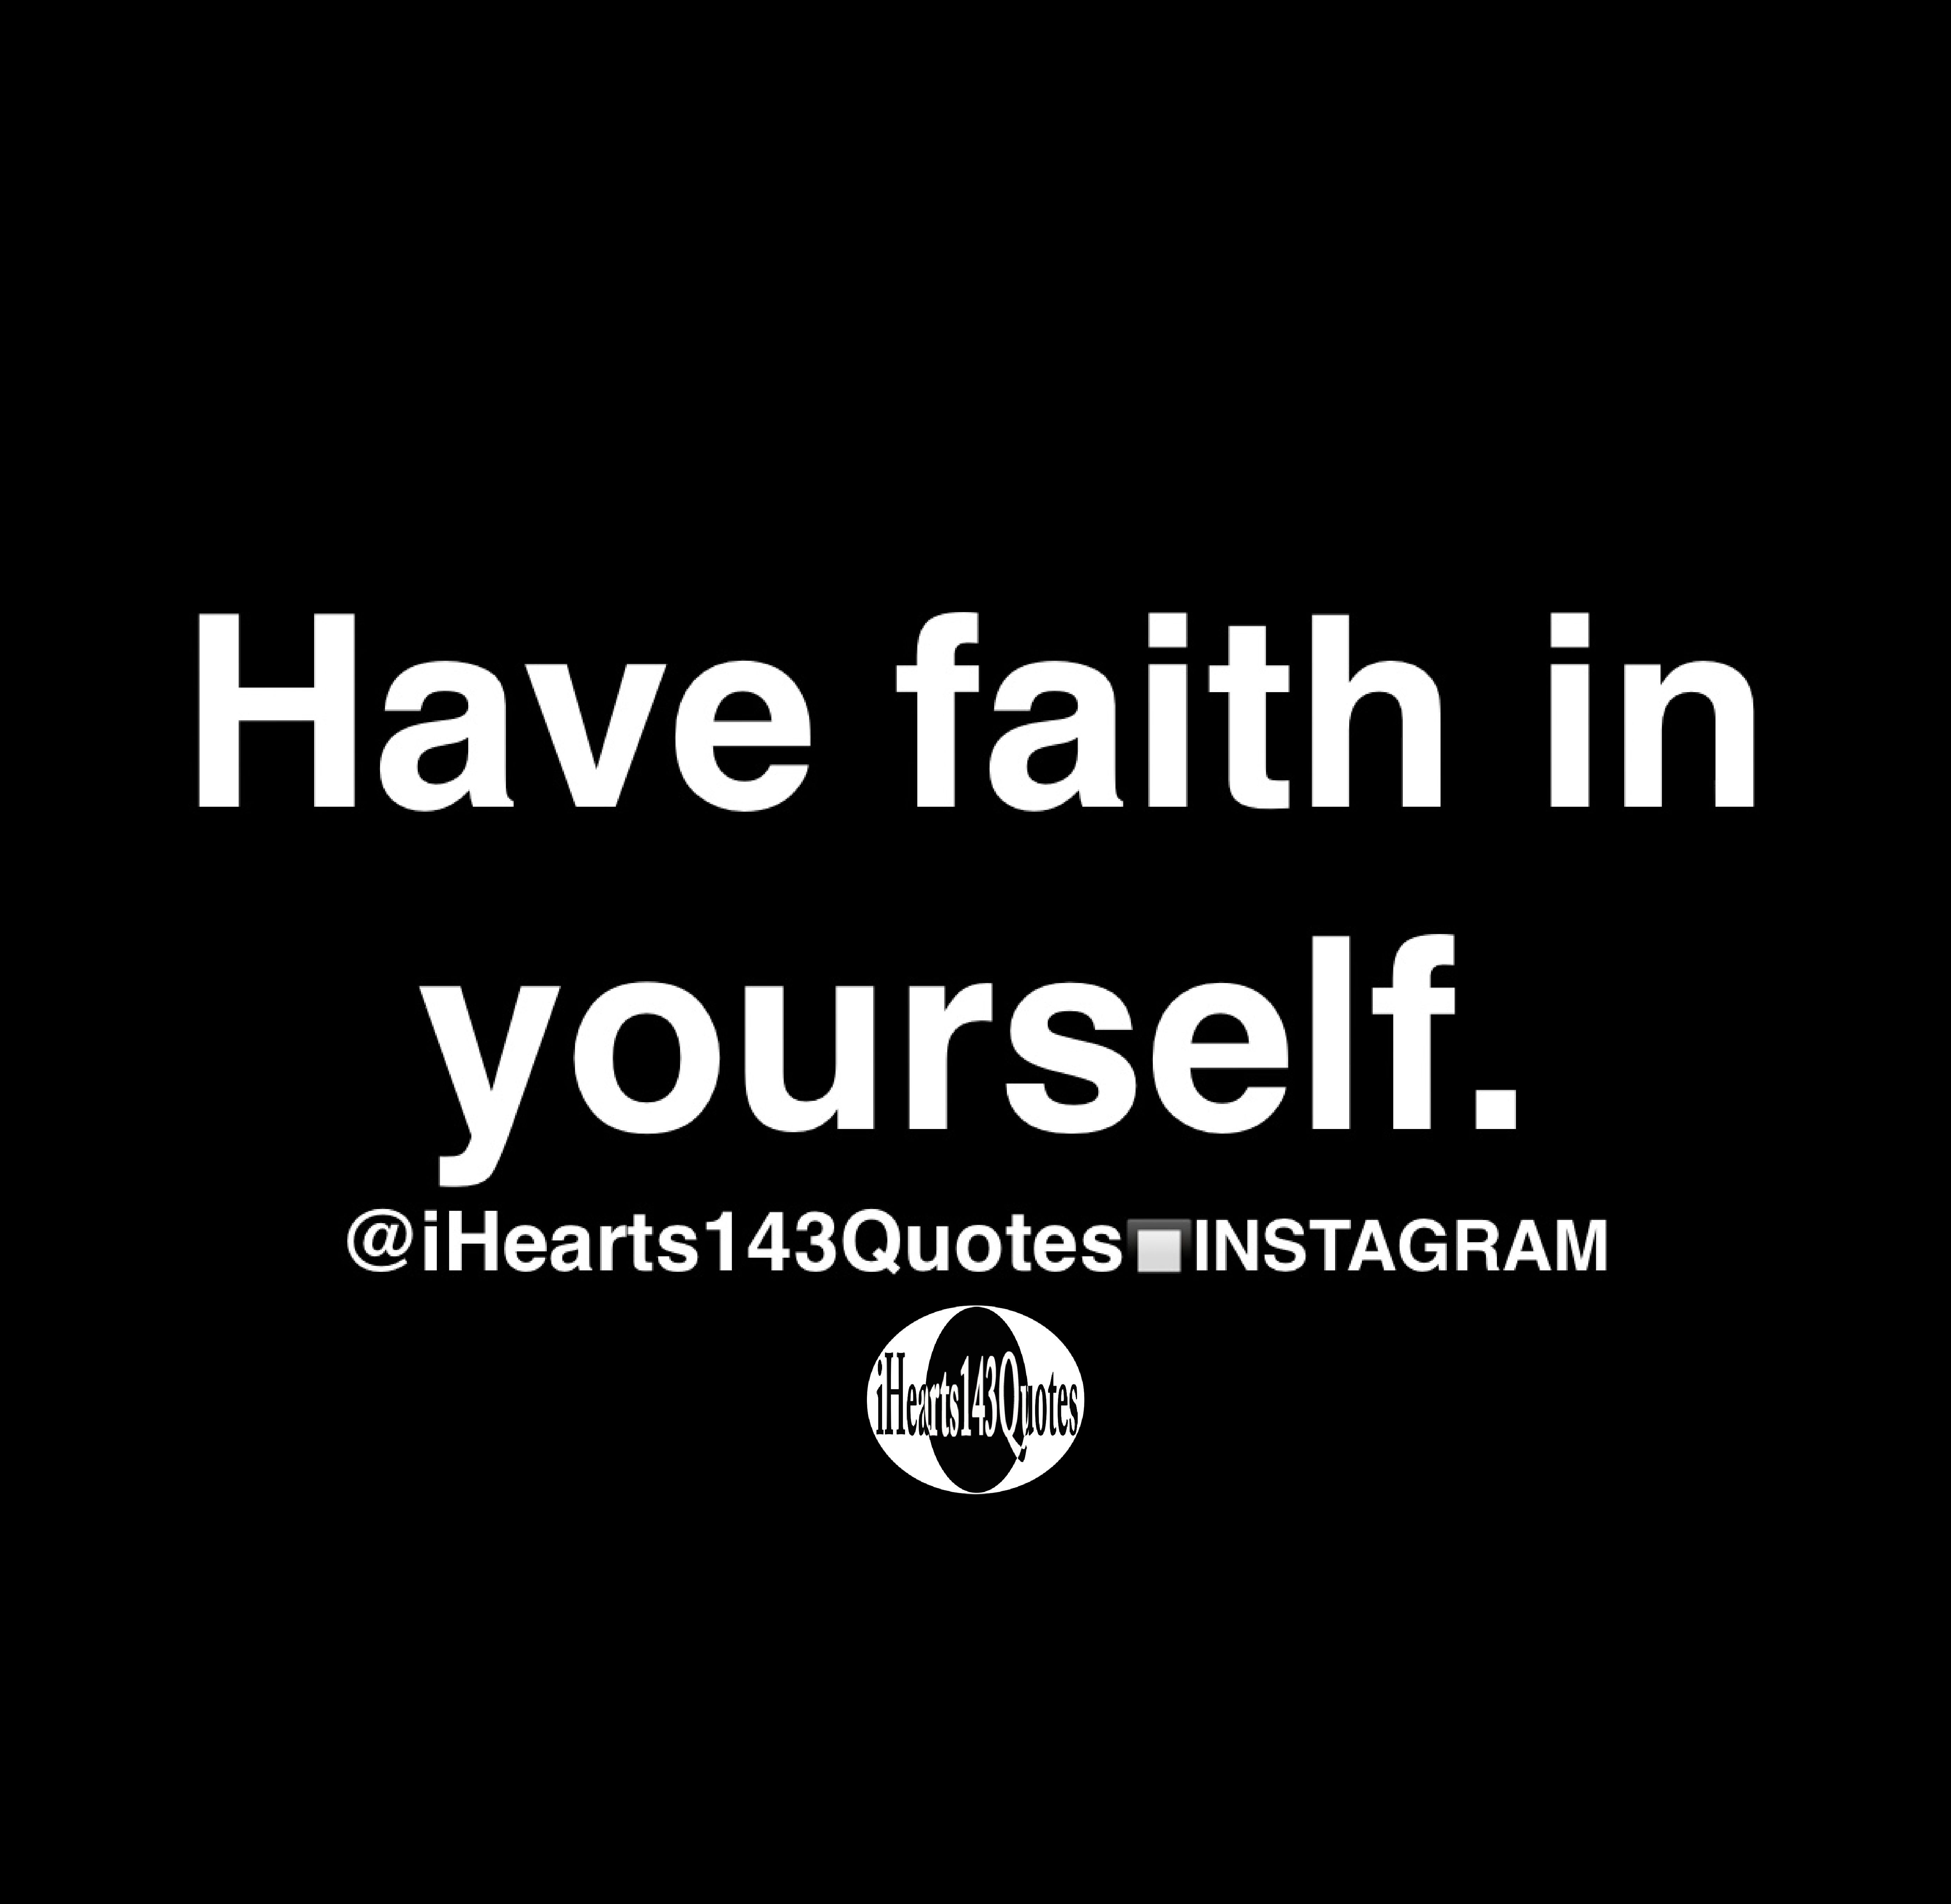 Have faith in yourself - Quotes - iHearts143Quotes